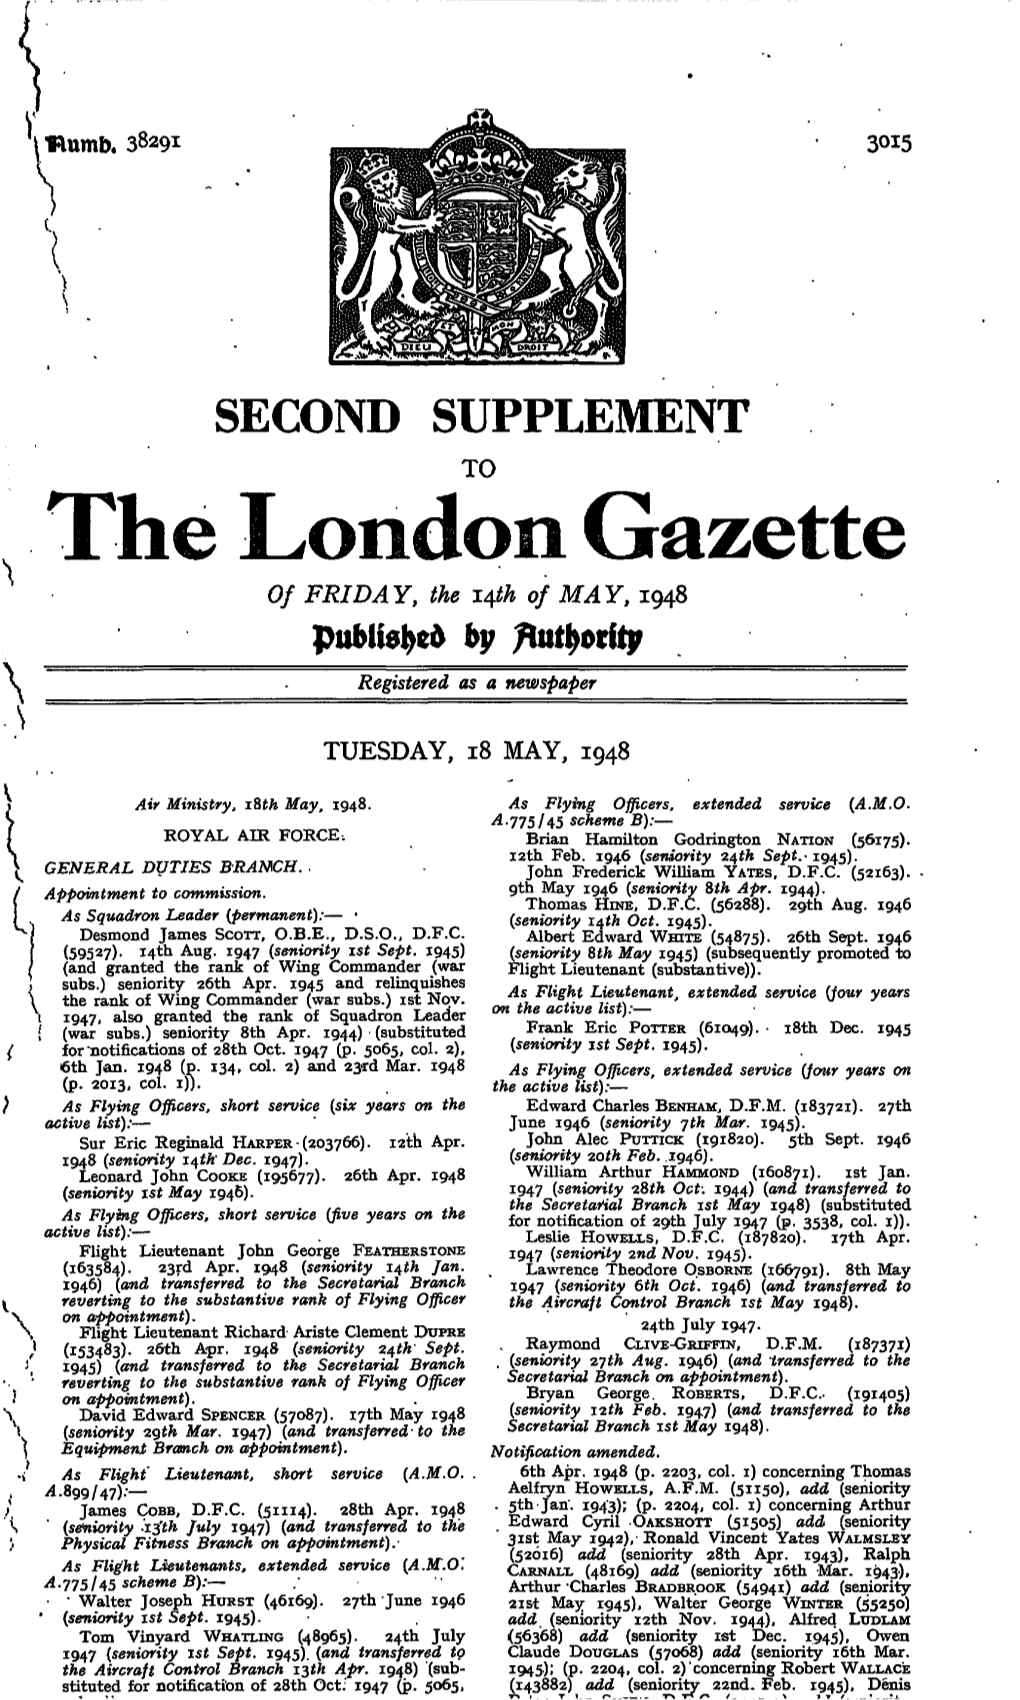 The London Gazette of FRIDAY, the 14^ of MAY, 1948 by \ Registered As a Newspaper